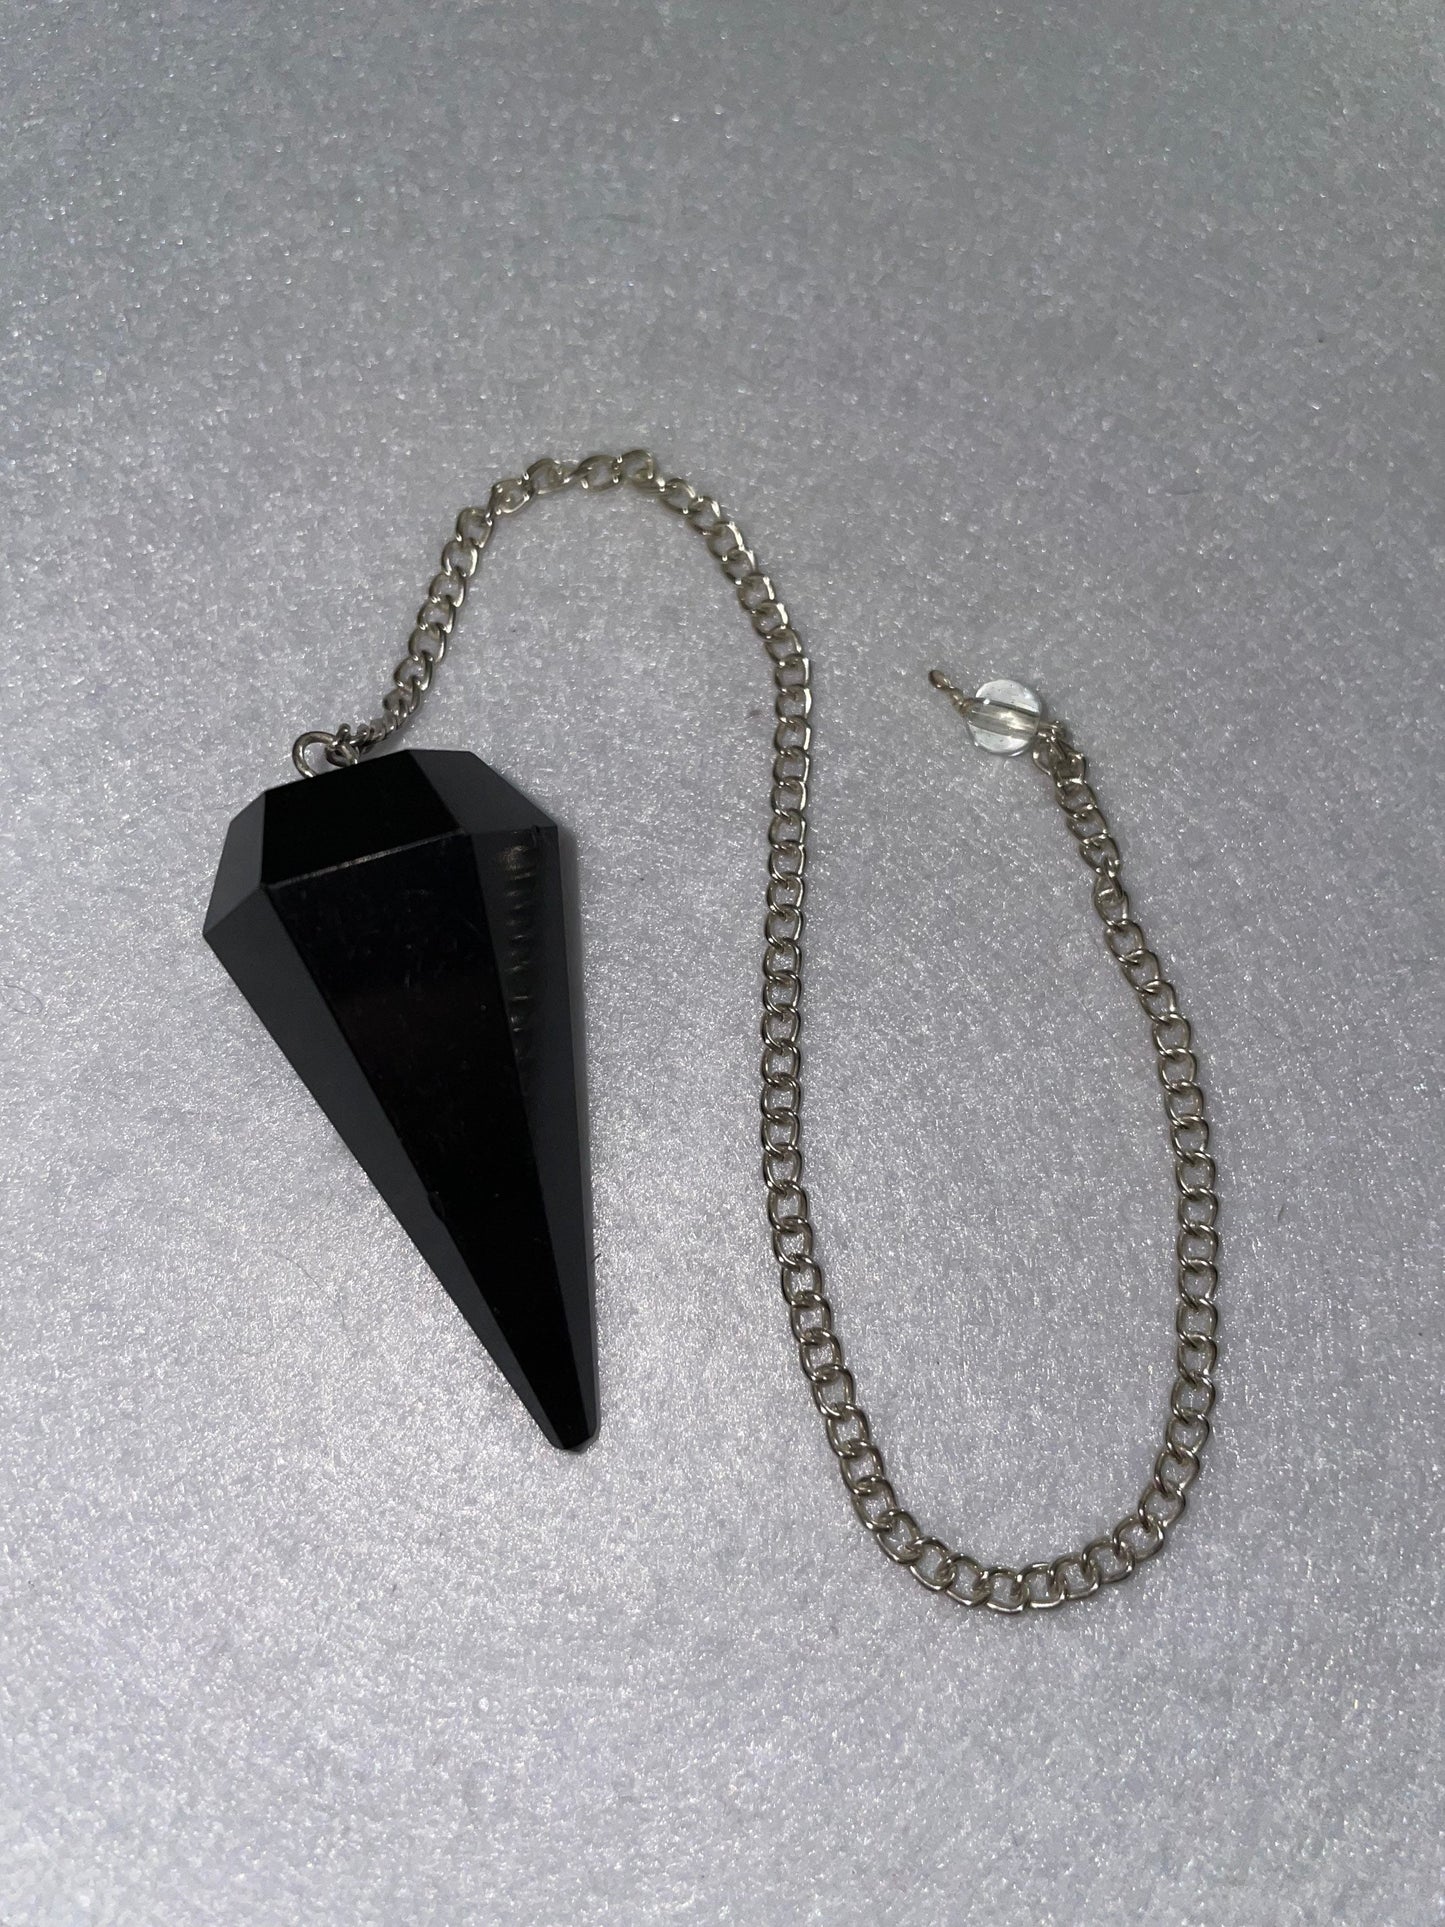 Beautiful Black Obsidian Pendulum is  1.75” and with chain is 9”.25”